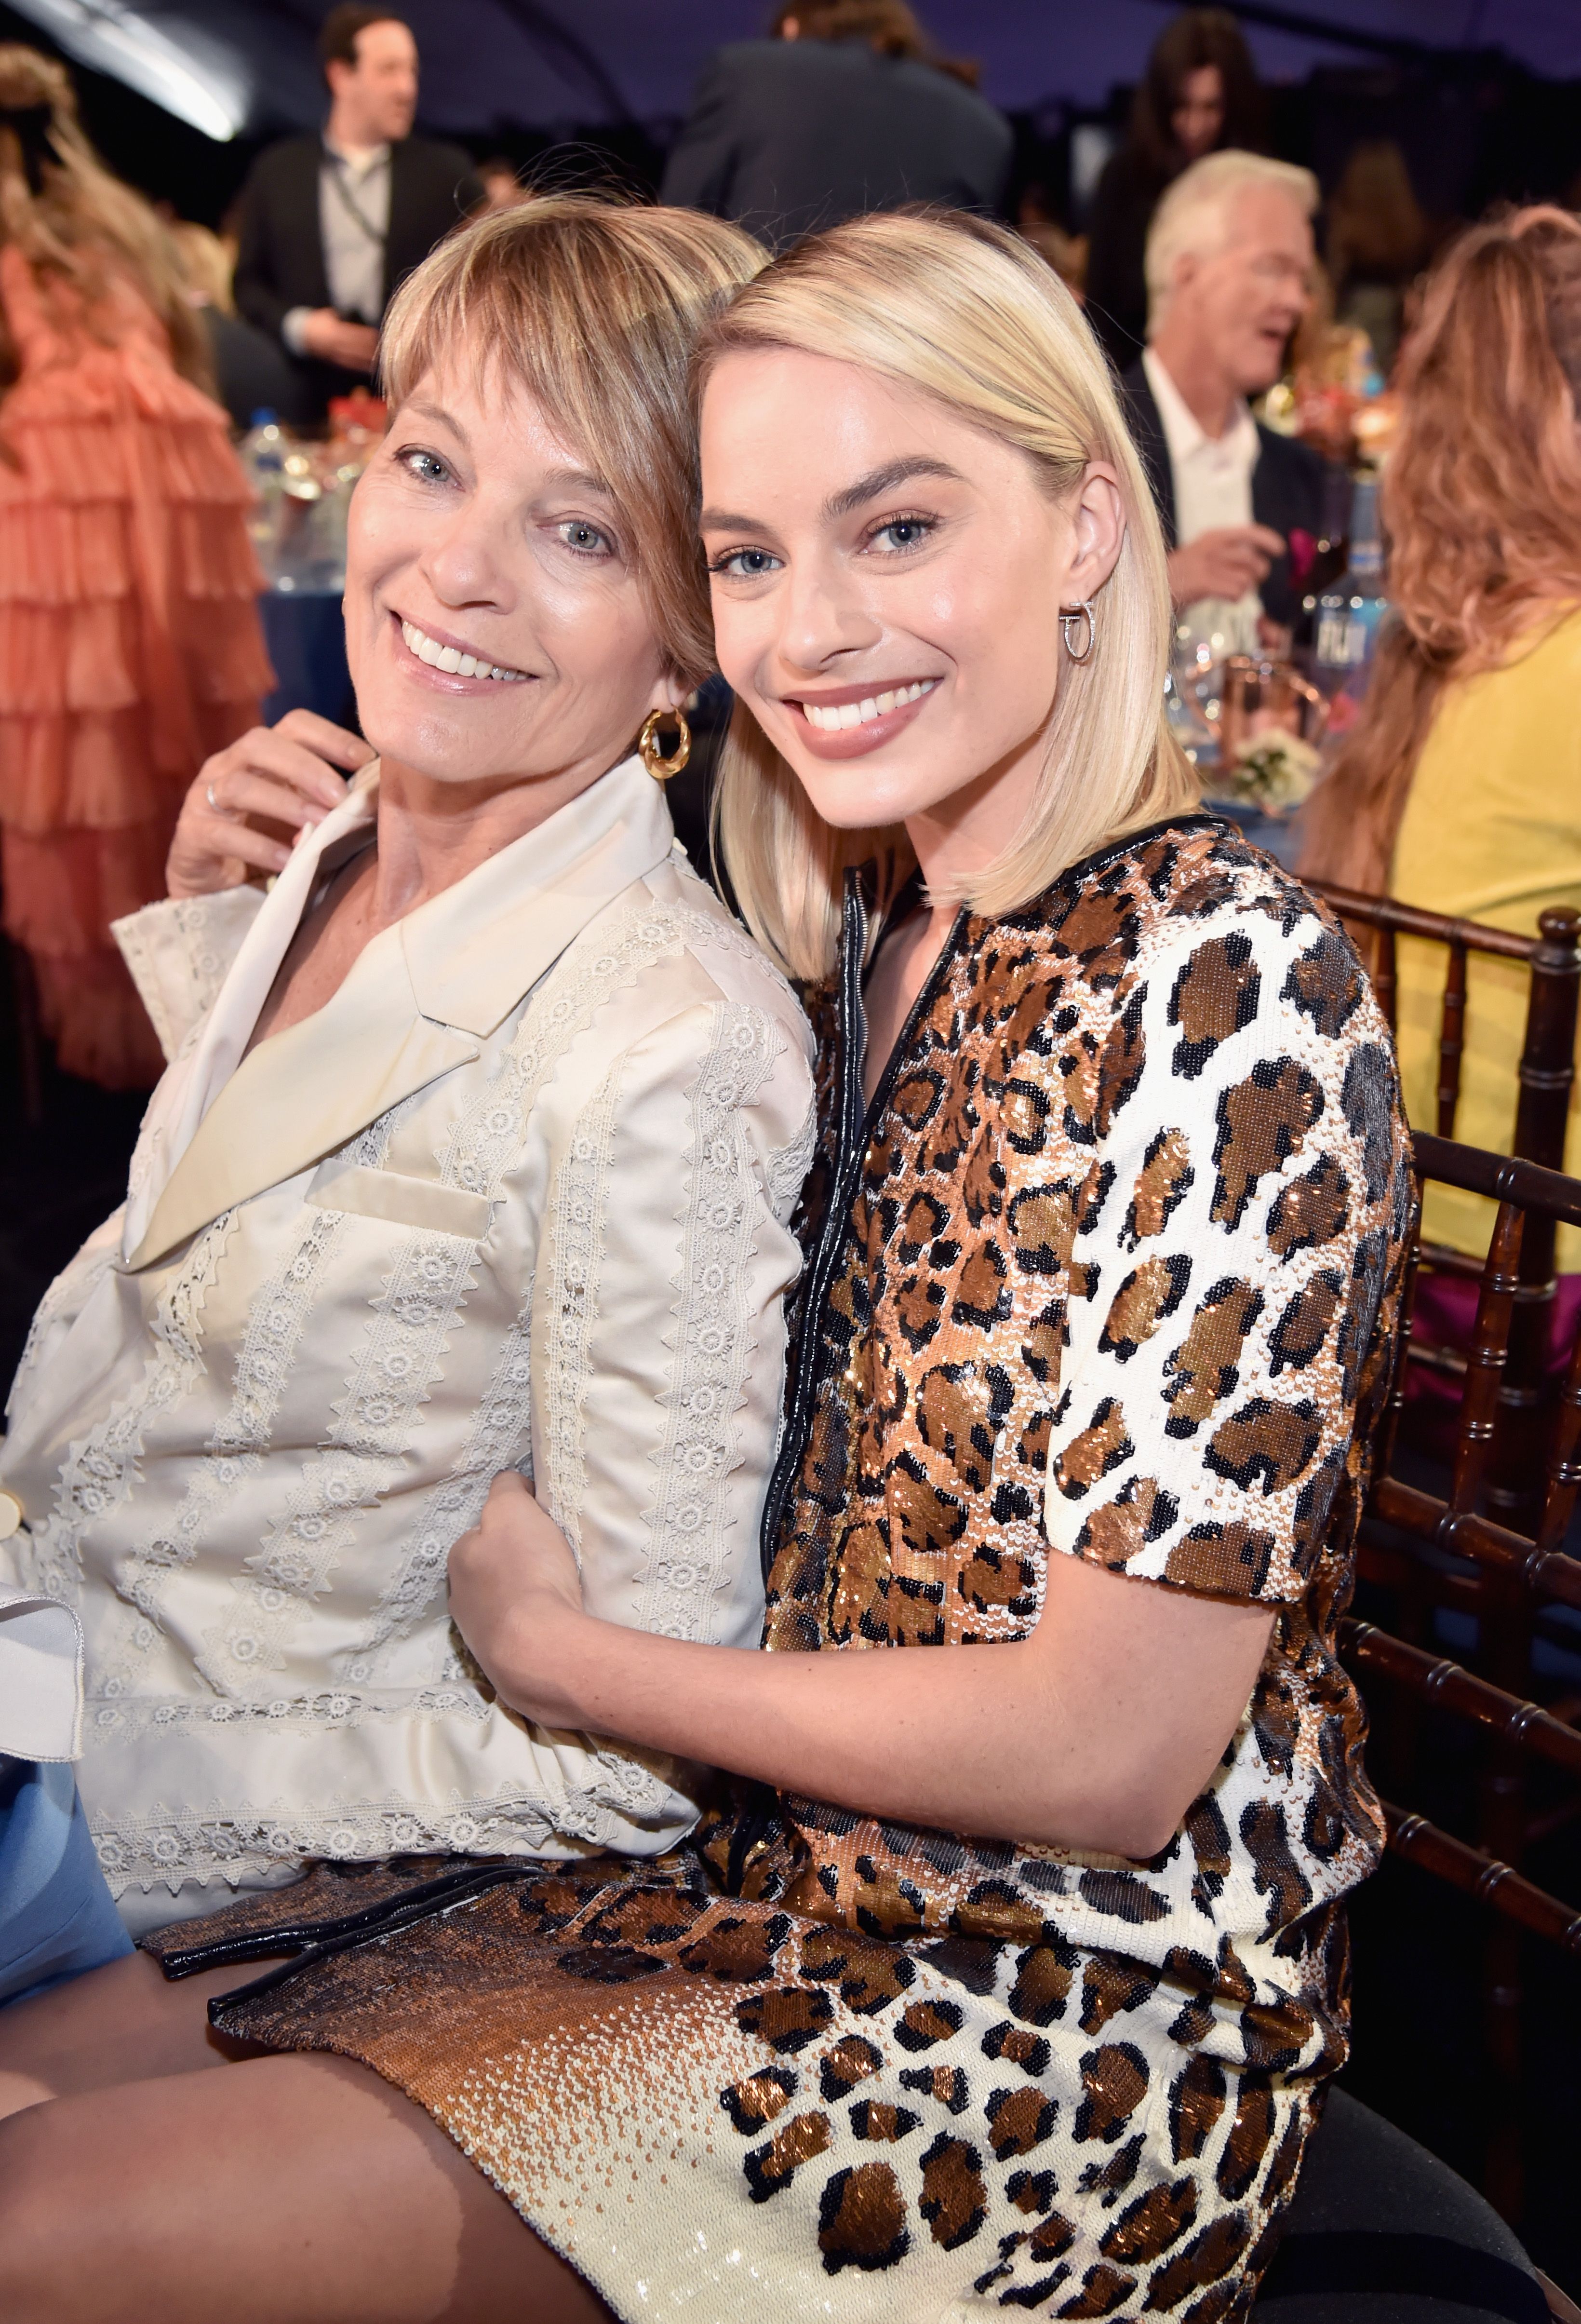 Sarie Kessler and Margot Robbie arrive at the 2018 Film Independent Spirit Awards on March 3, 2018 in Santa Monica, California. | Source: Getty Images